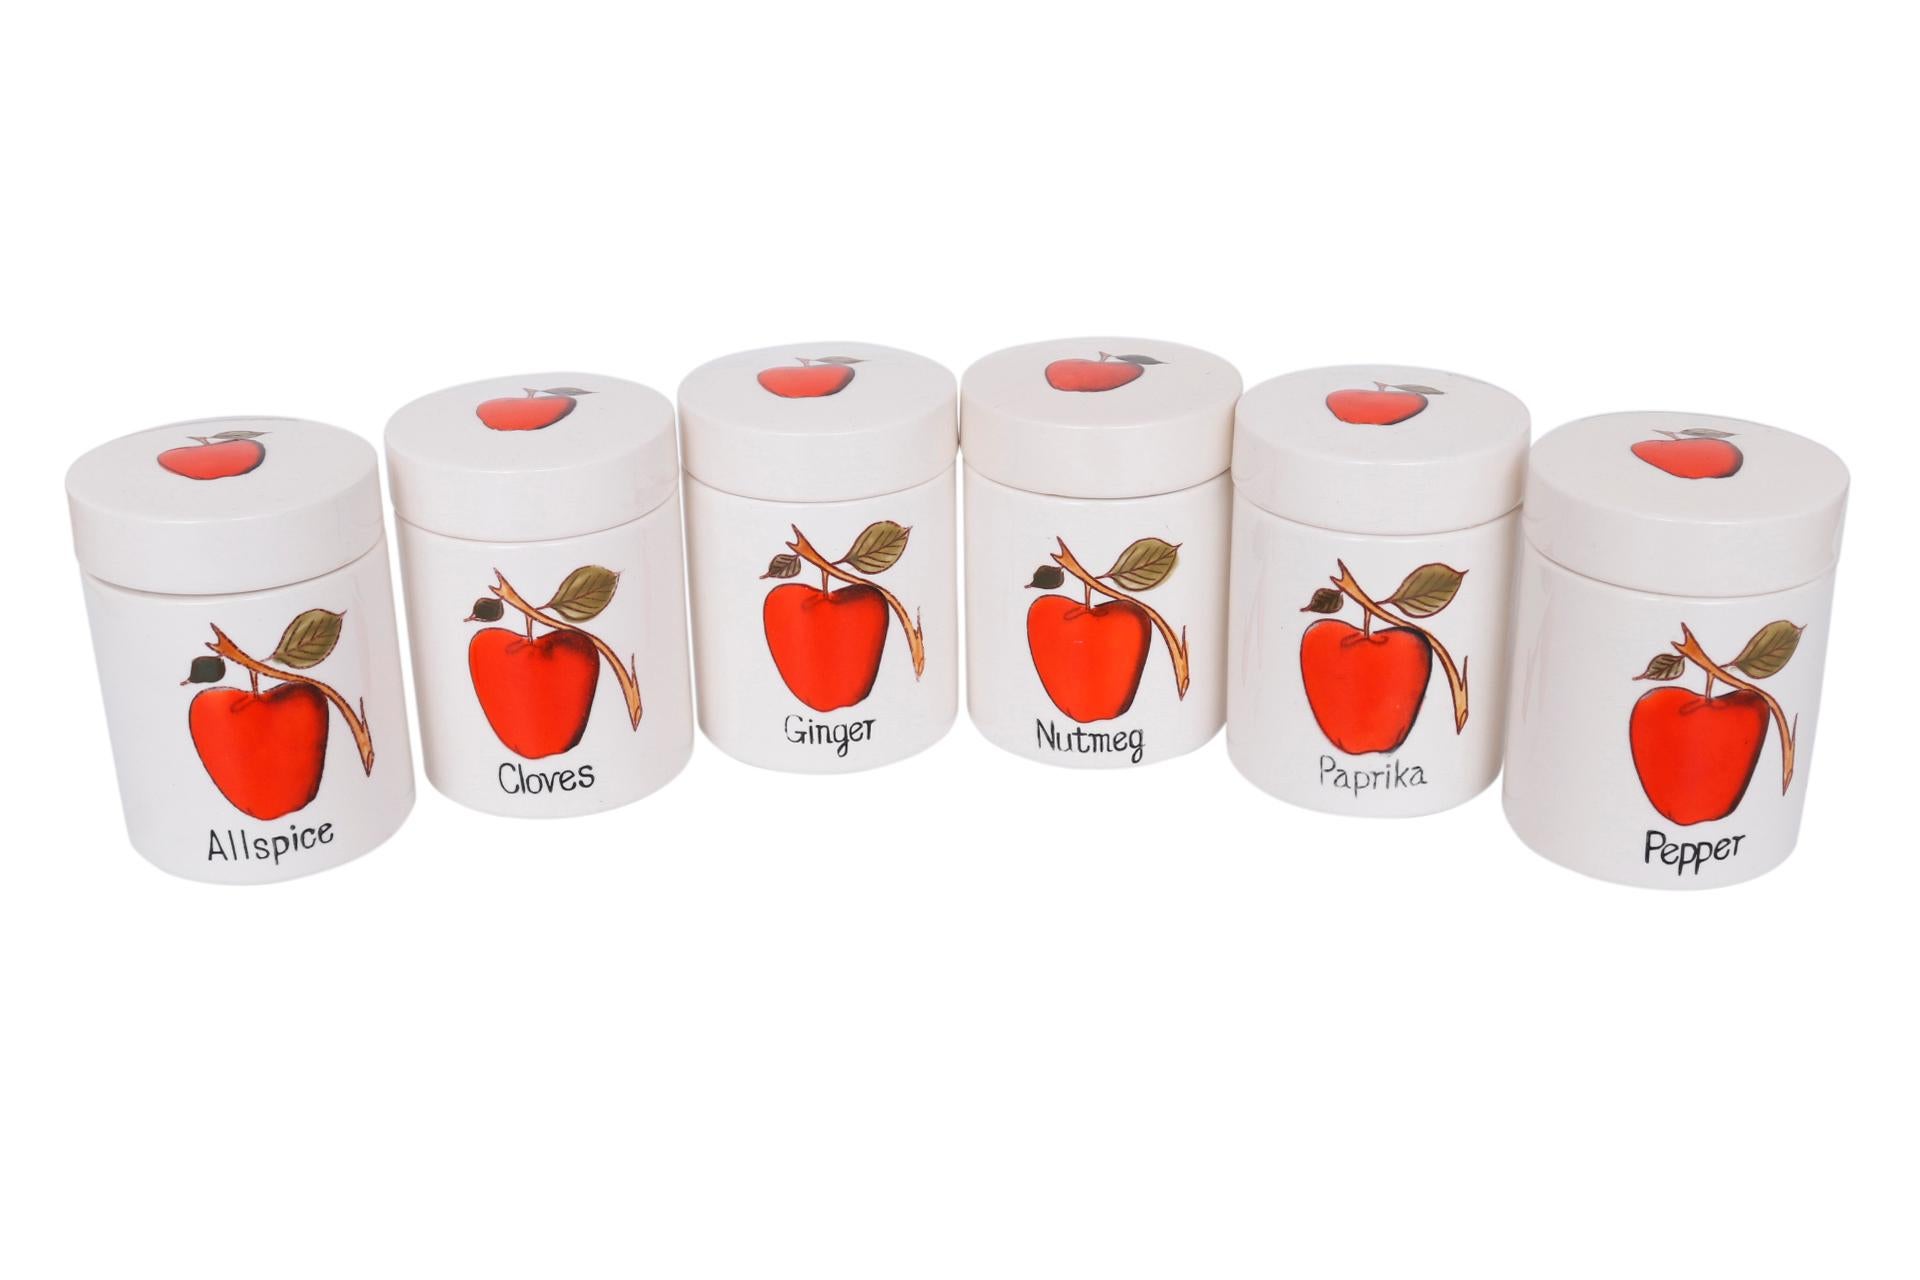 A set of six ceramic spice jars or canisters. Hand painted with red apples in front with small branches on the back. Lids are also decorated with red apples and are lined with a cork rim for an airtight seal. Labeled Allspice, Cloves, Ginger,